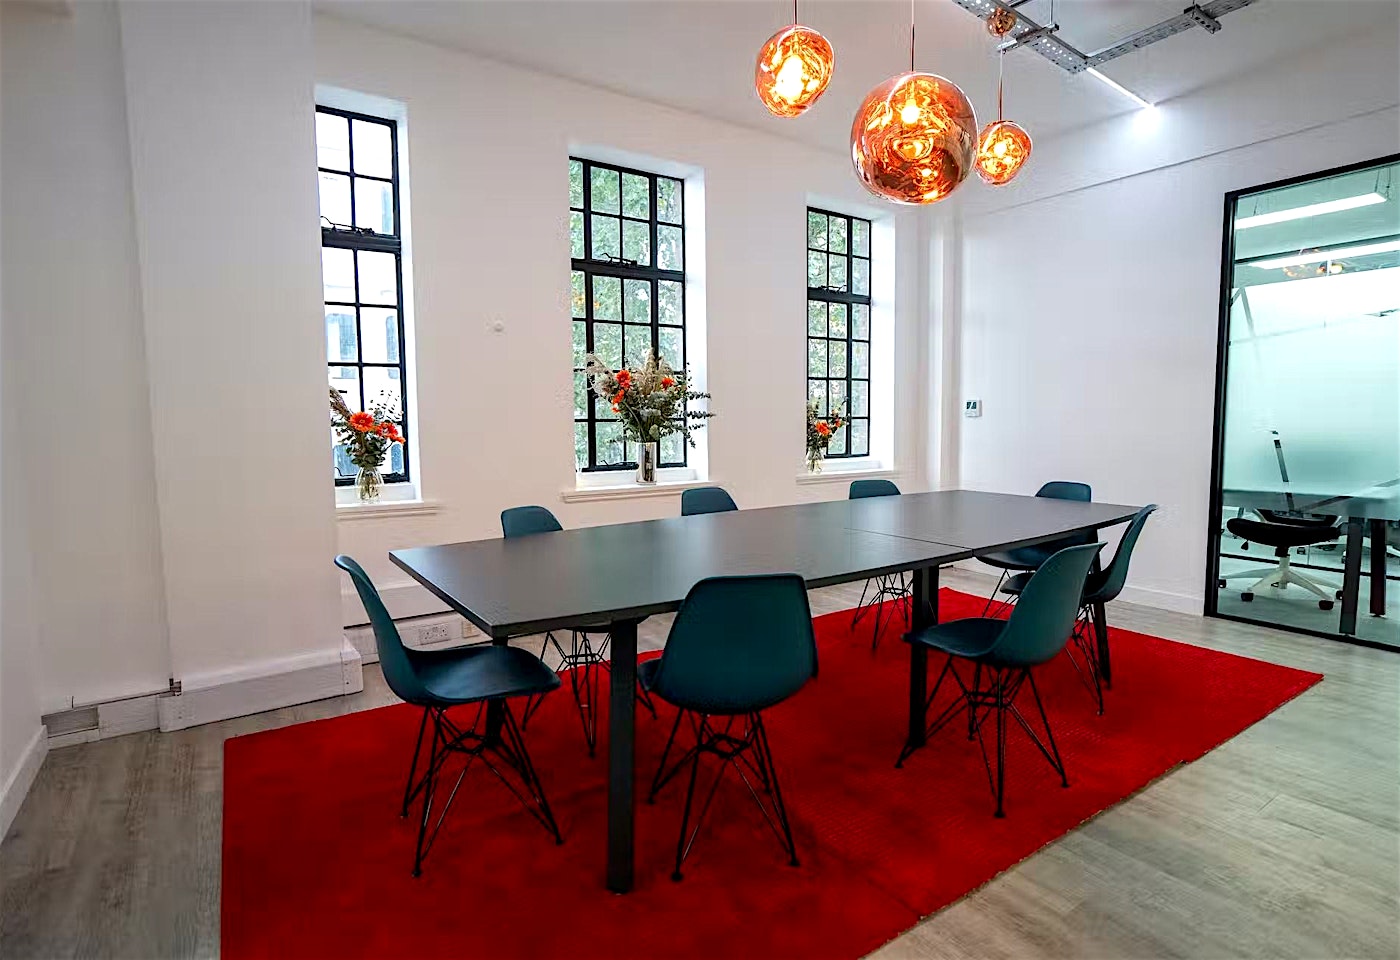 A boardroom-style meeting room